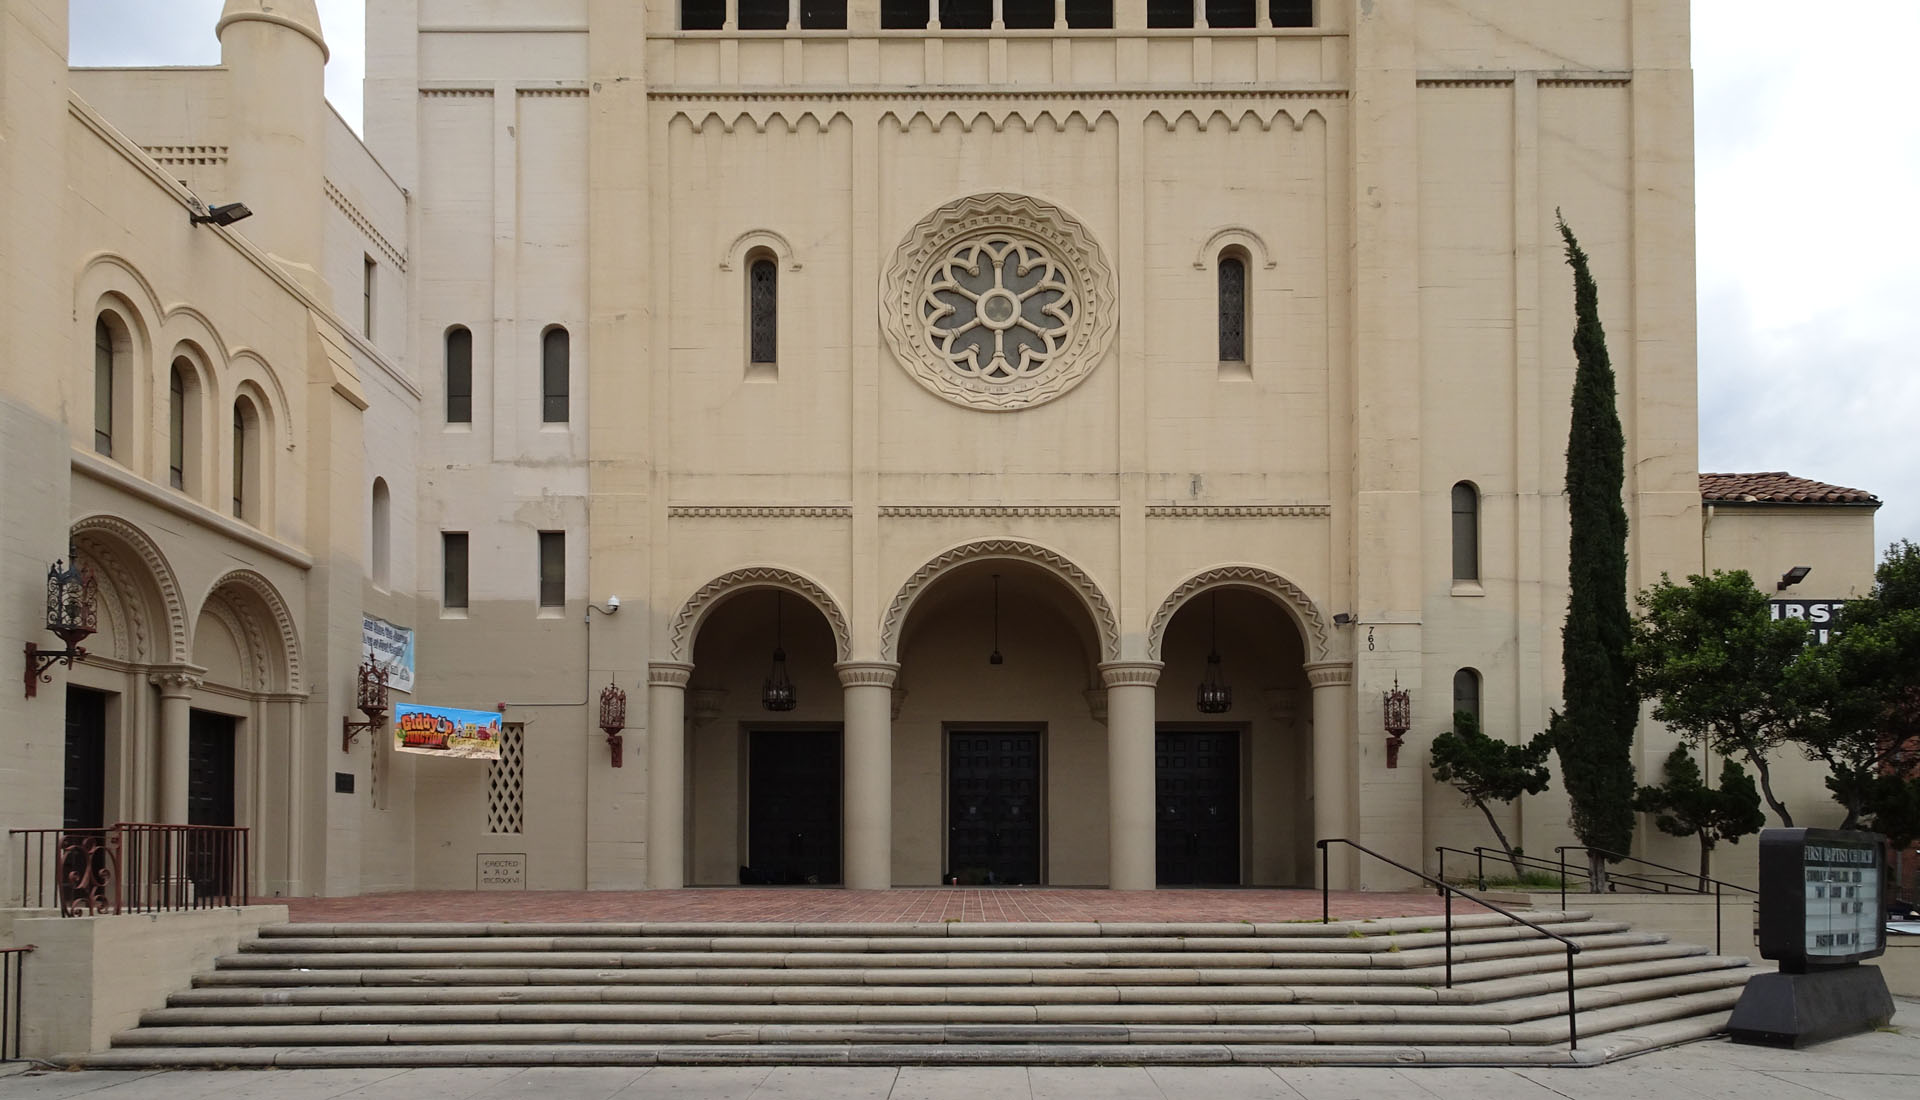 First Baptist Church of Los Angeles